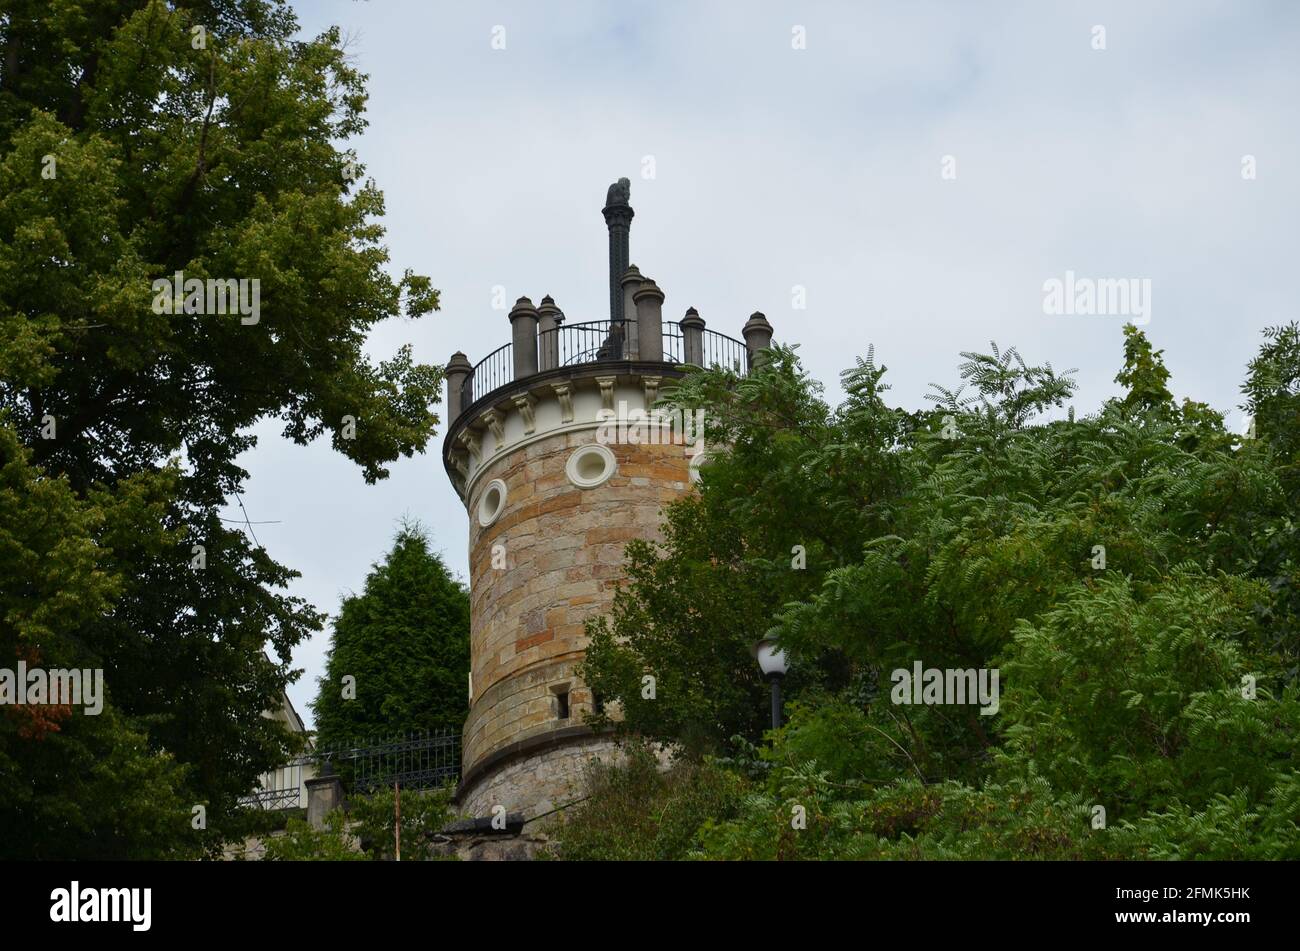 tower with a cat Karlovy Vary, the cat on the tower, cat back to town Stock Photo